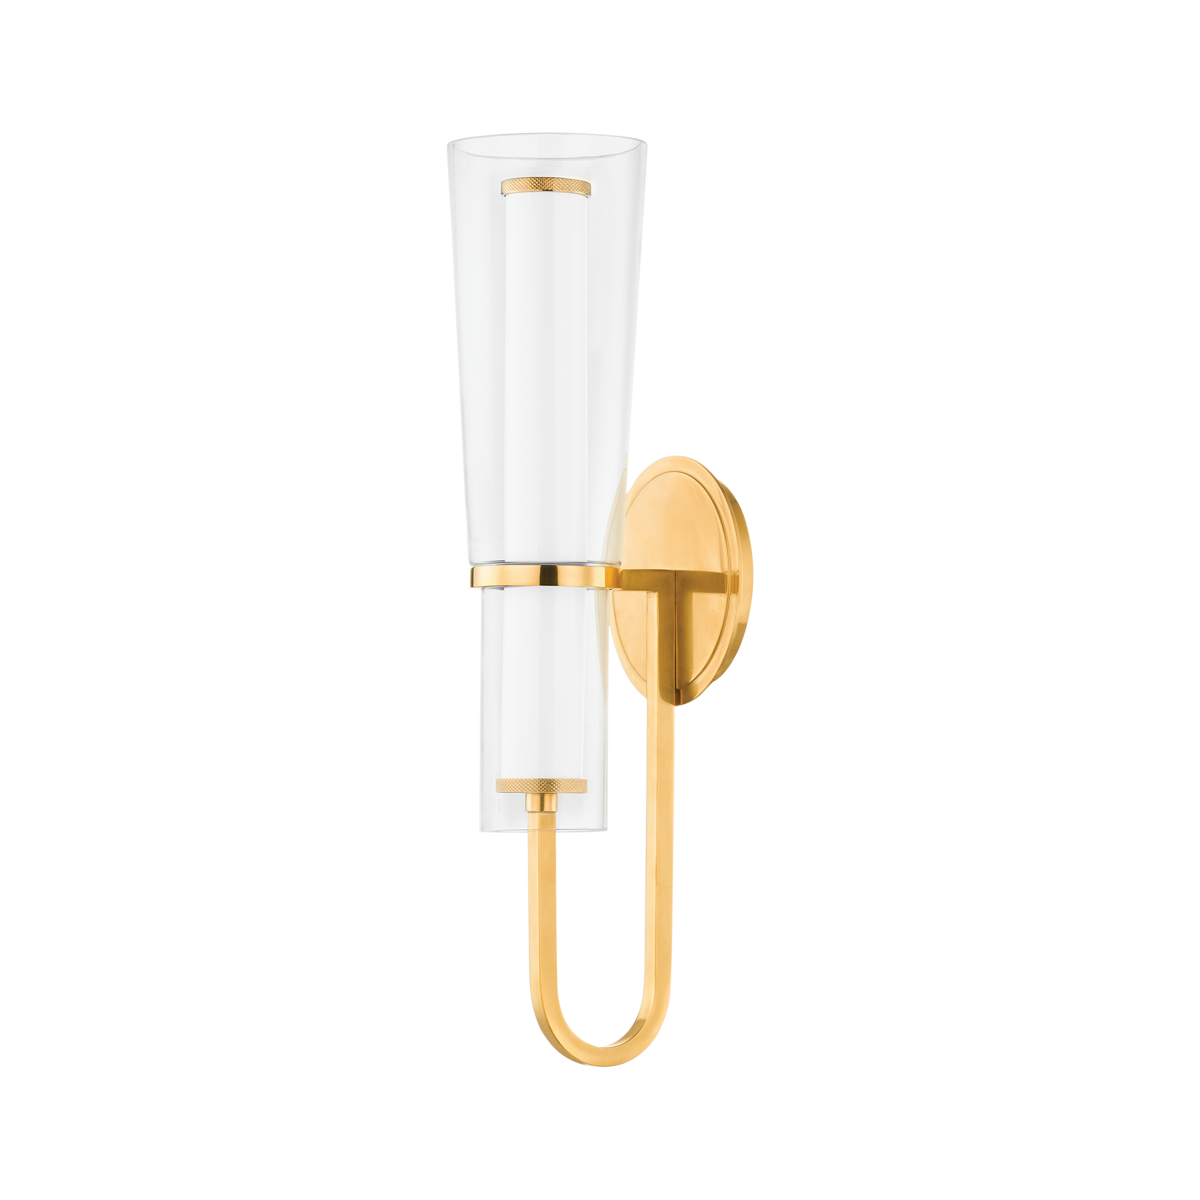 Hudson Valley Lighting VANCOUVER Wall Sconce